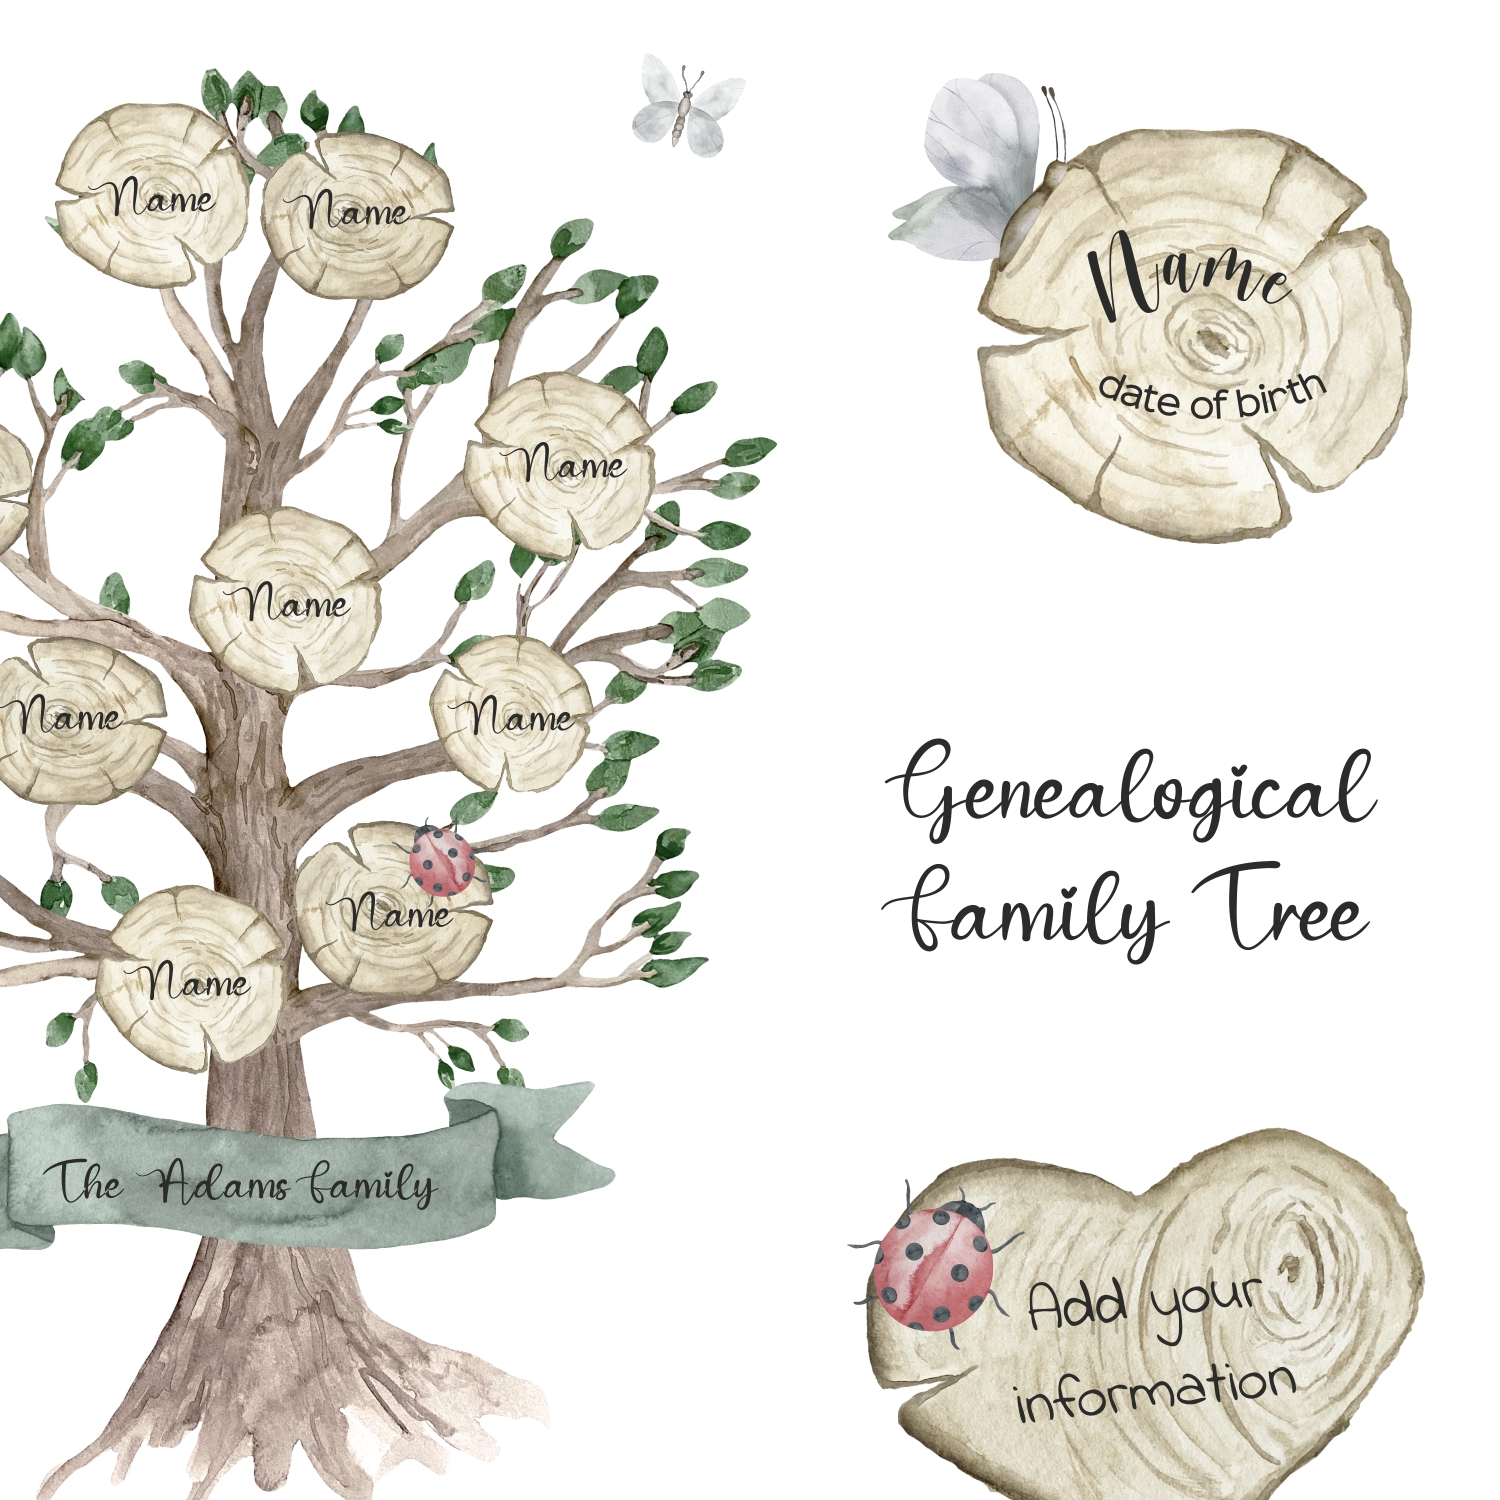 12 Family Tree Ideas You Can DIY - How to Make a Family Tree